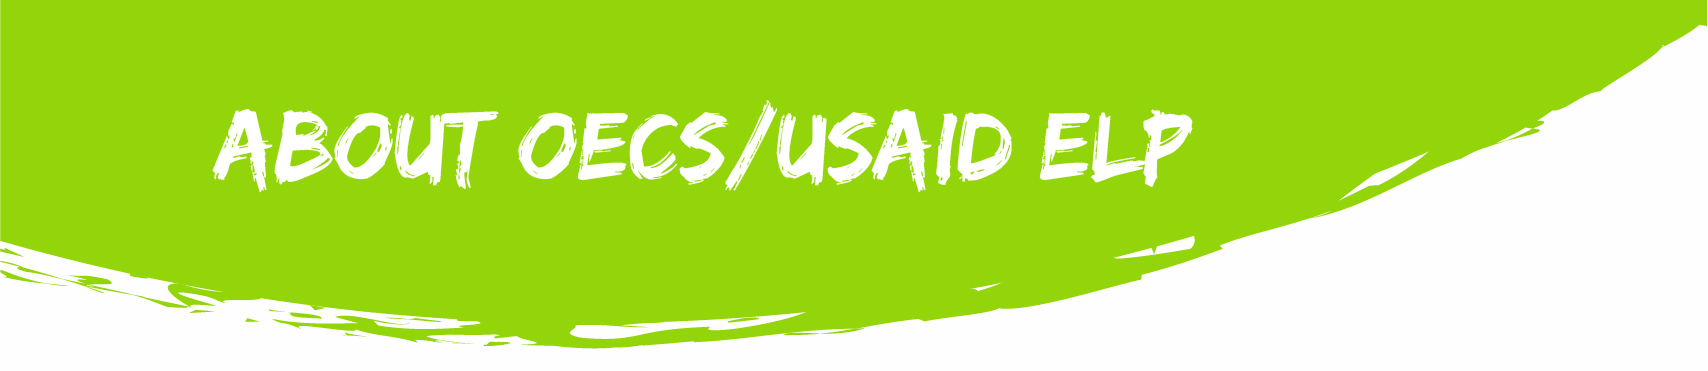 About OECS/USAID ELP